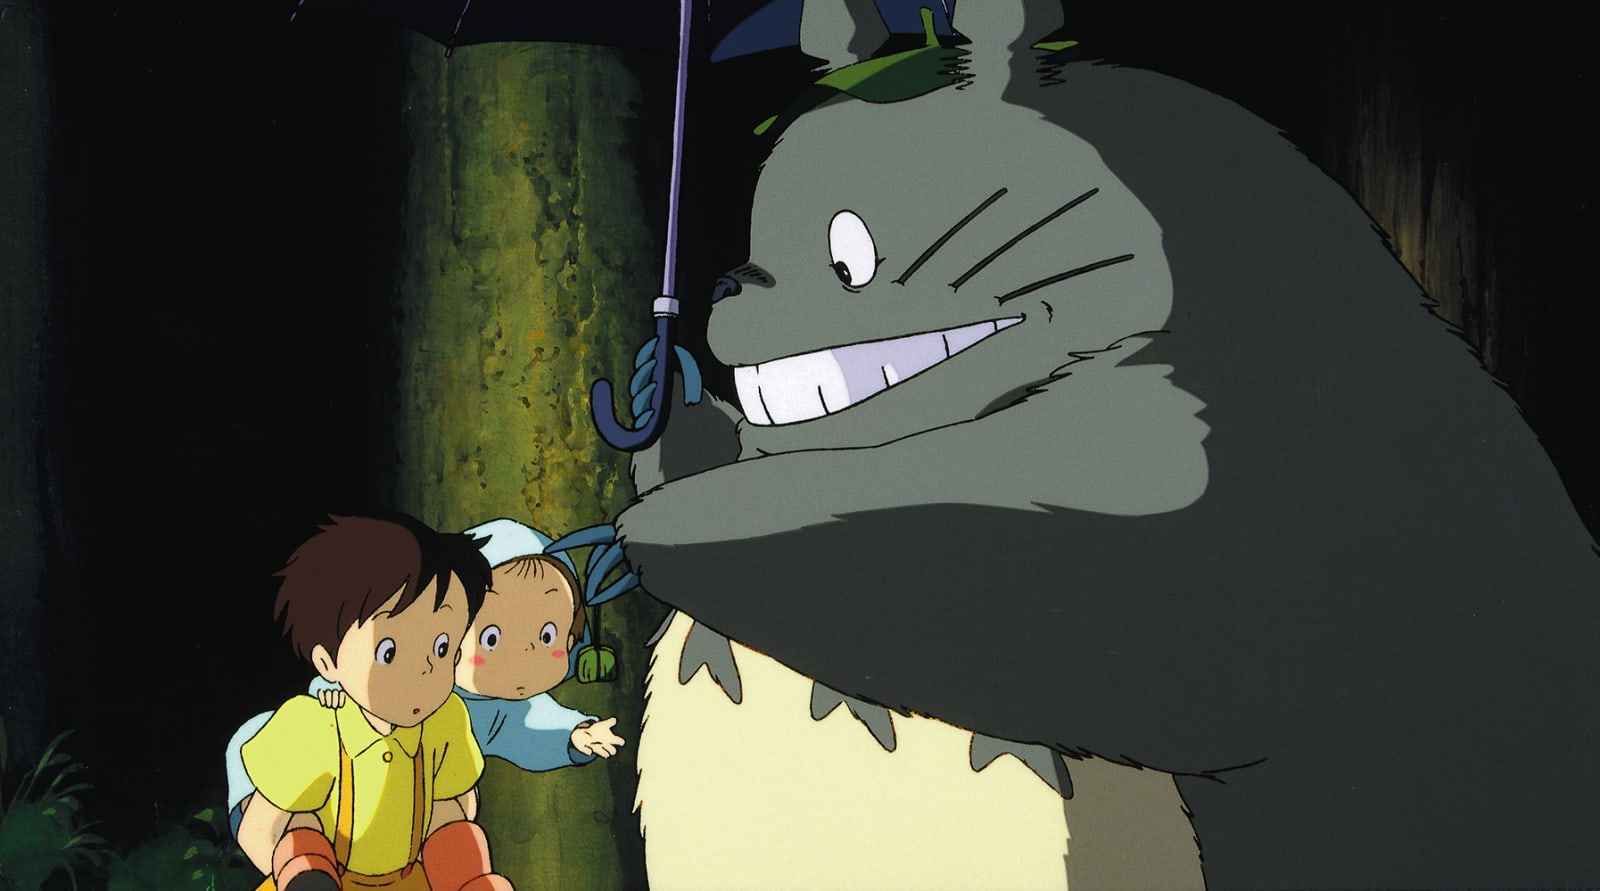 Studio Ghibli debunked this major theory about My Neighbor Totoro